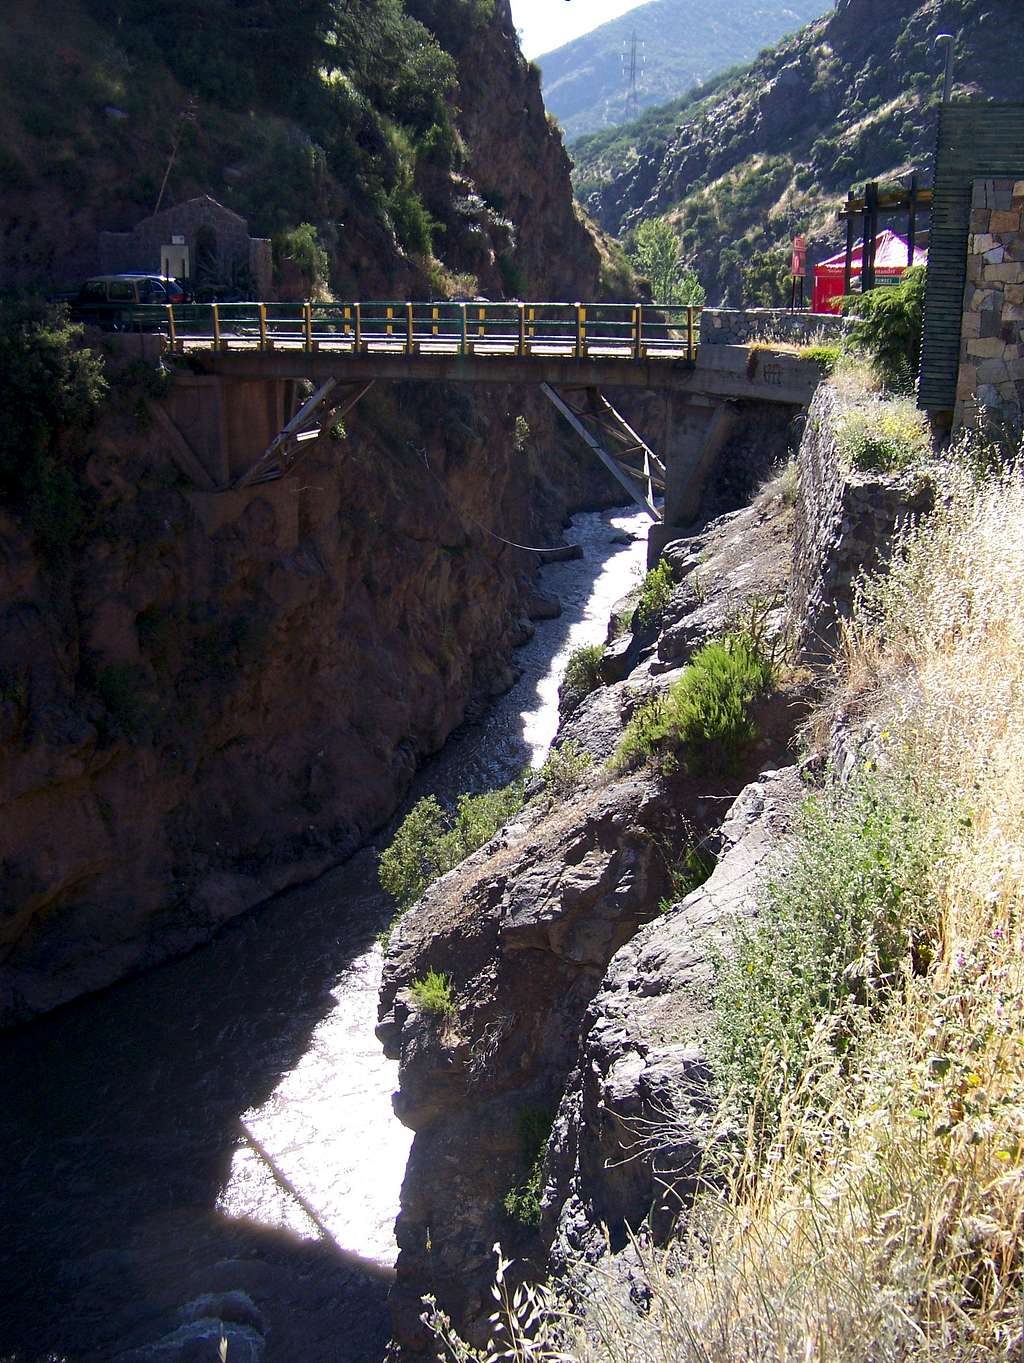 The old wooden bridge above the gorge of Mapocho river